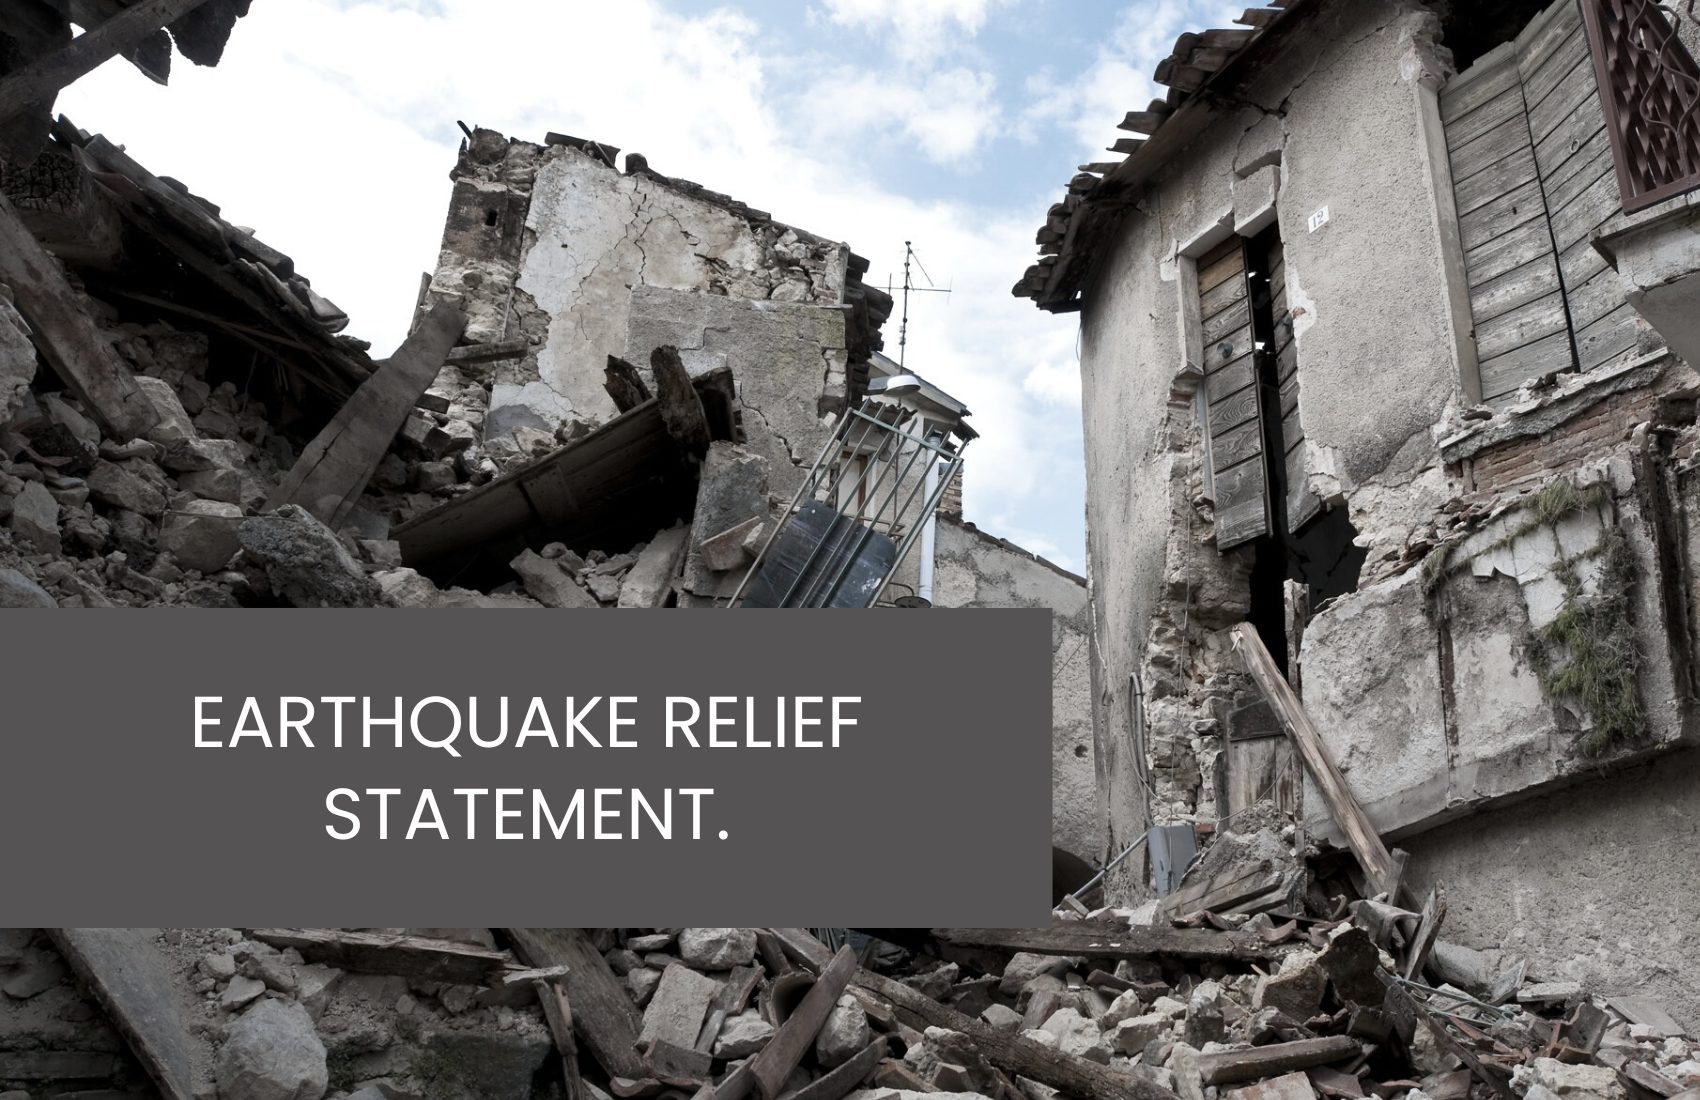 Earthquake relief statement